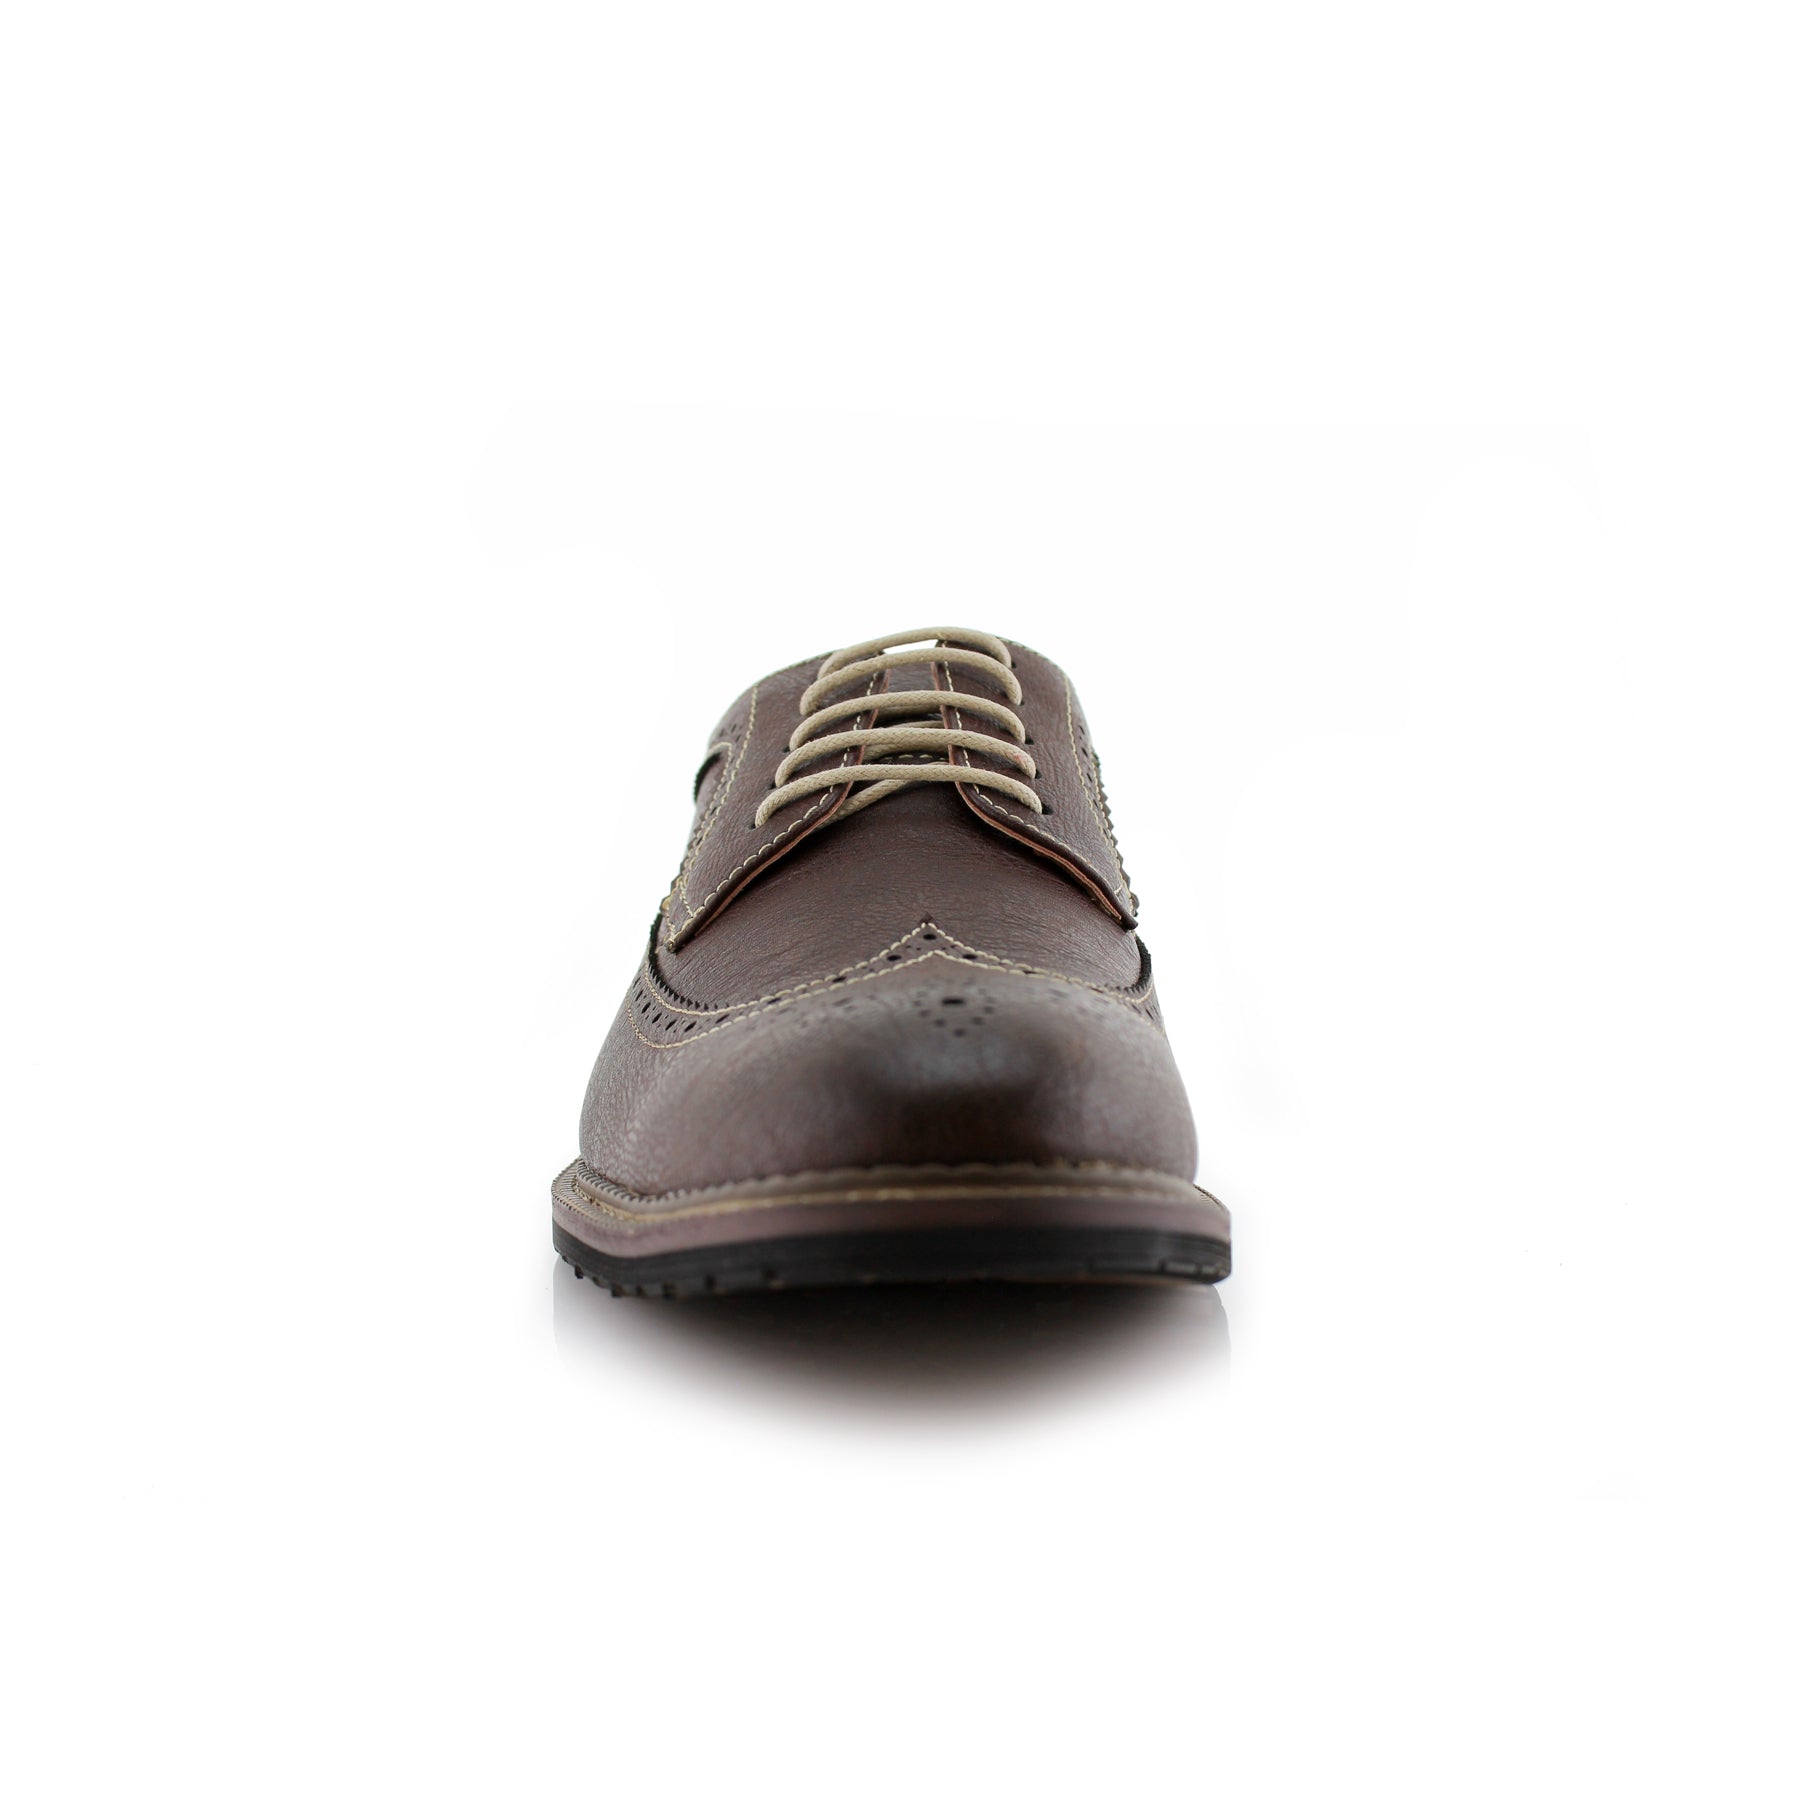 Longwing Brogue Derby Shoes | Phillip by Ferro Aldo | Conal Footwear | Front Angle View